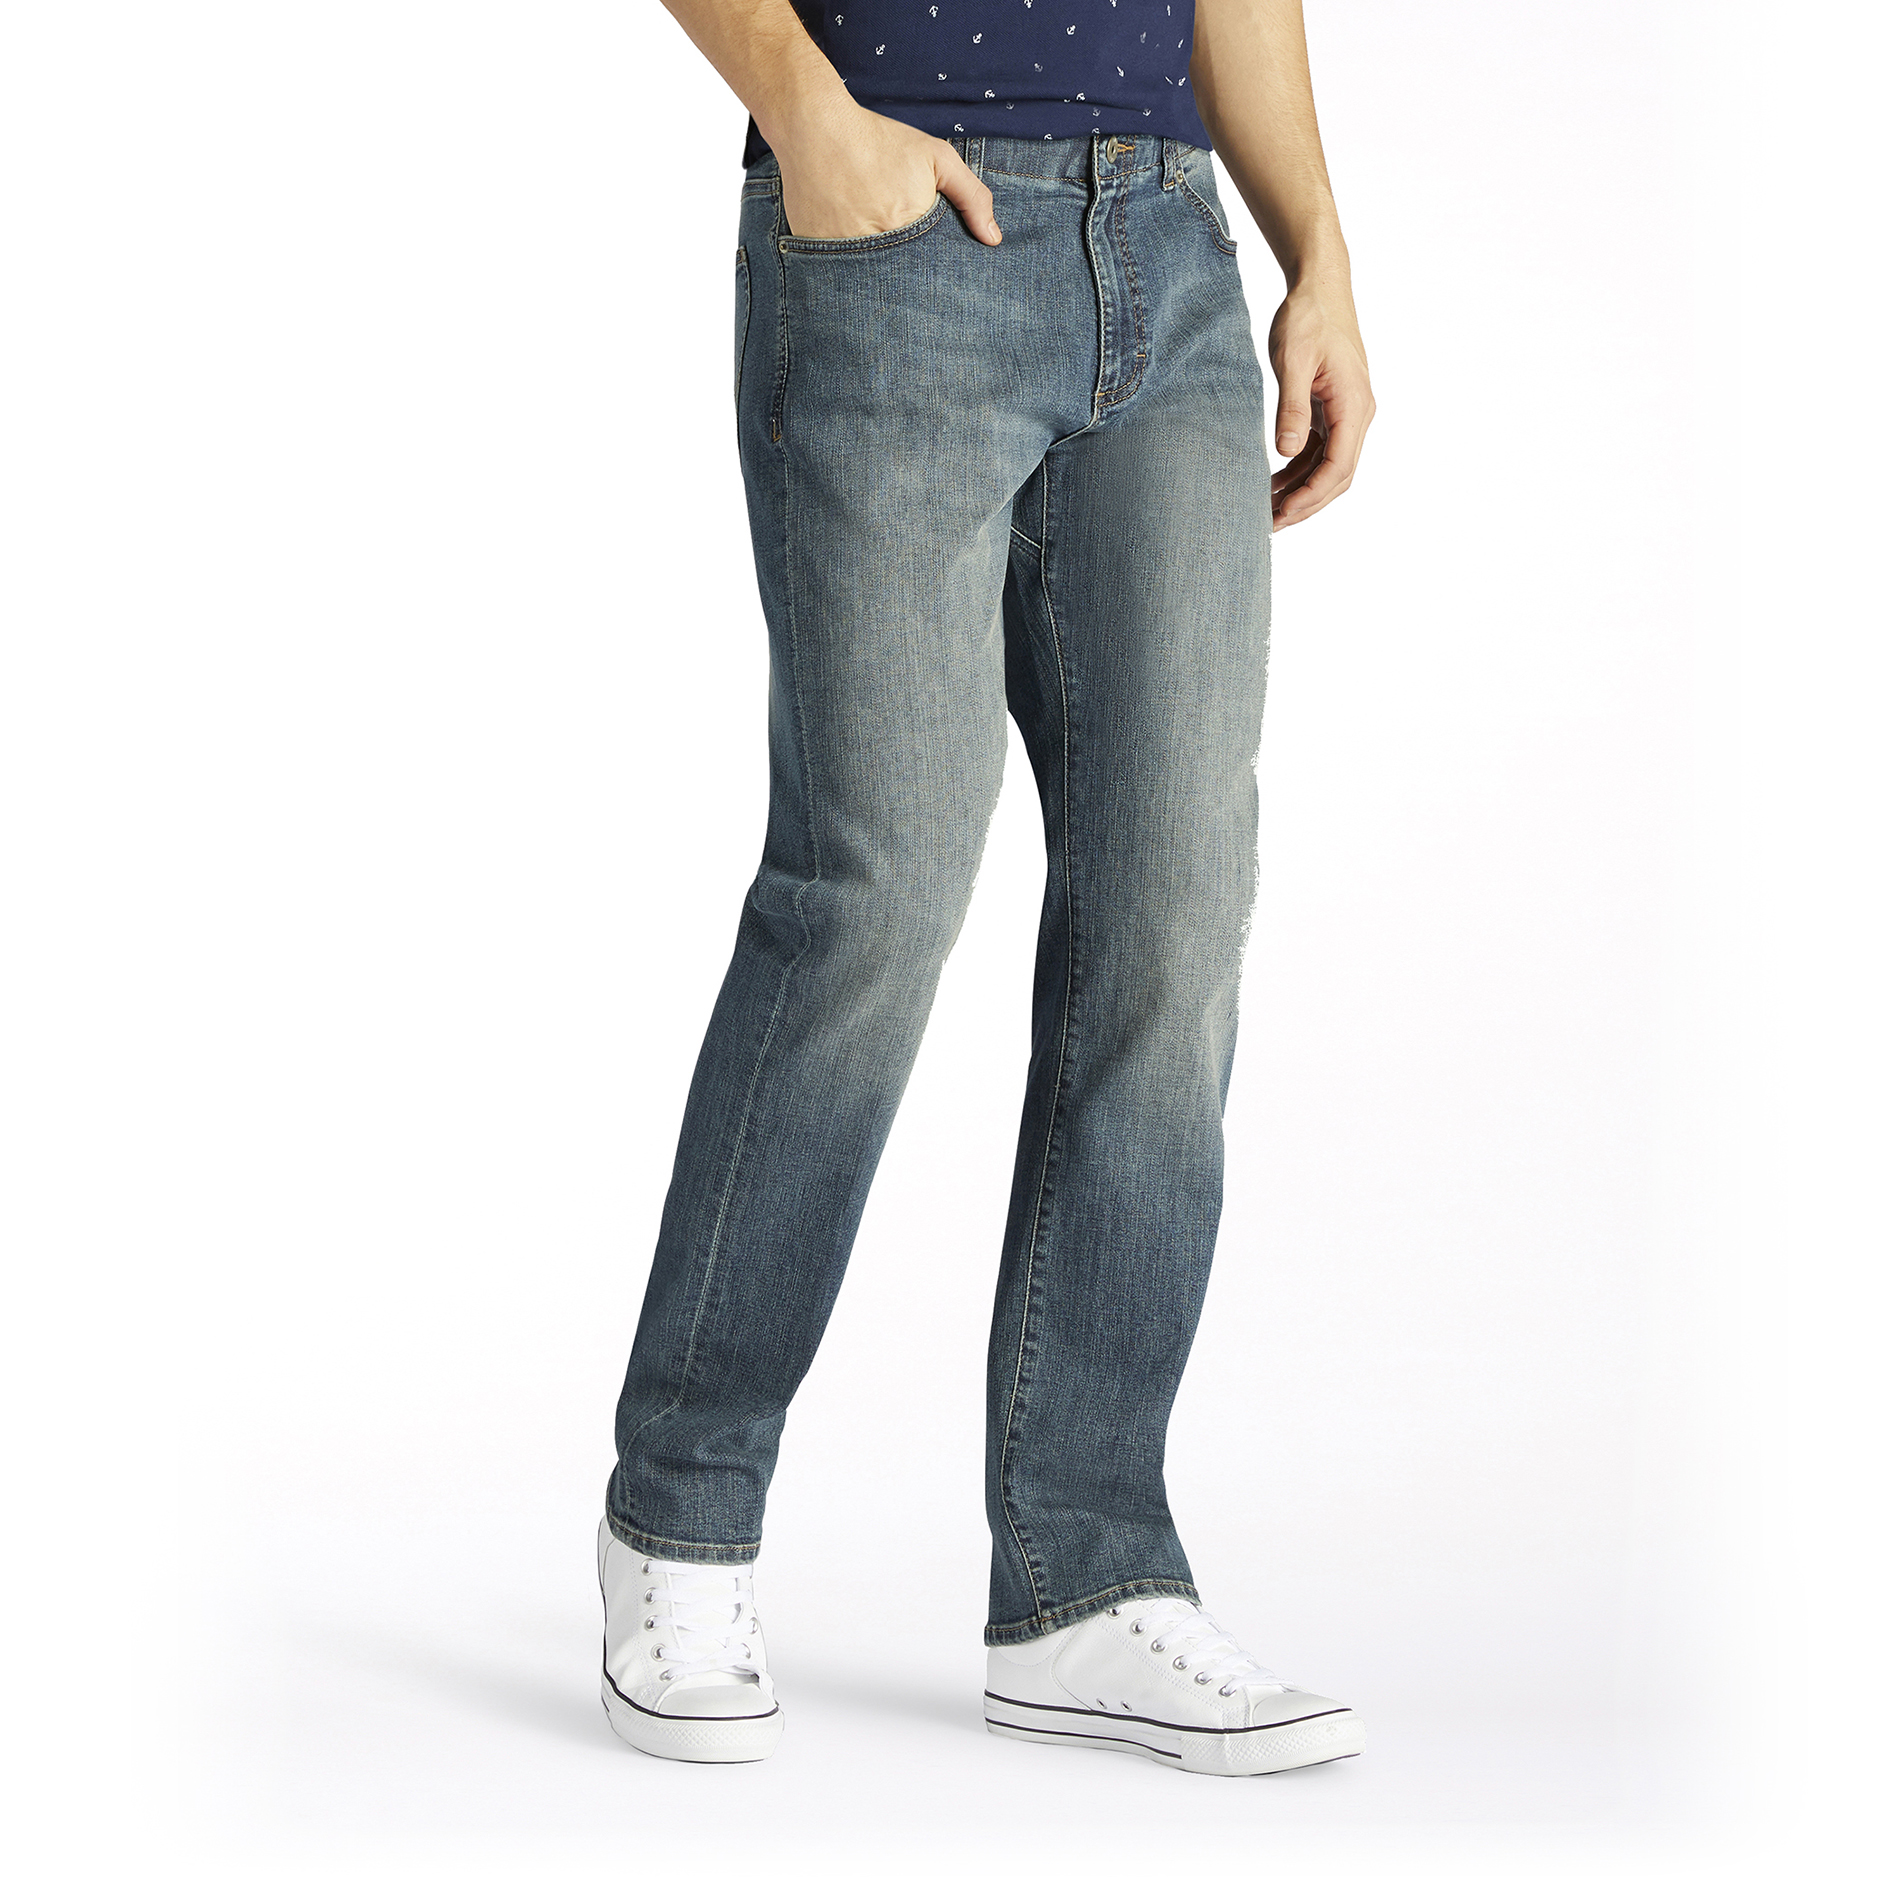 lee extreme motion athletic jeans